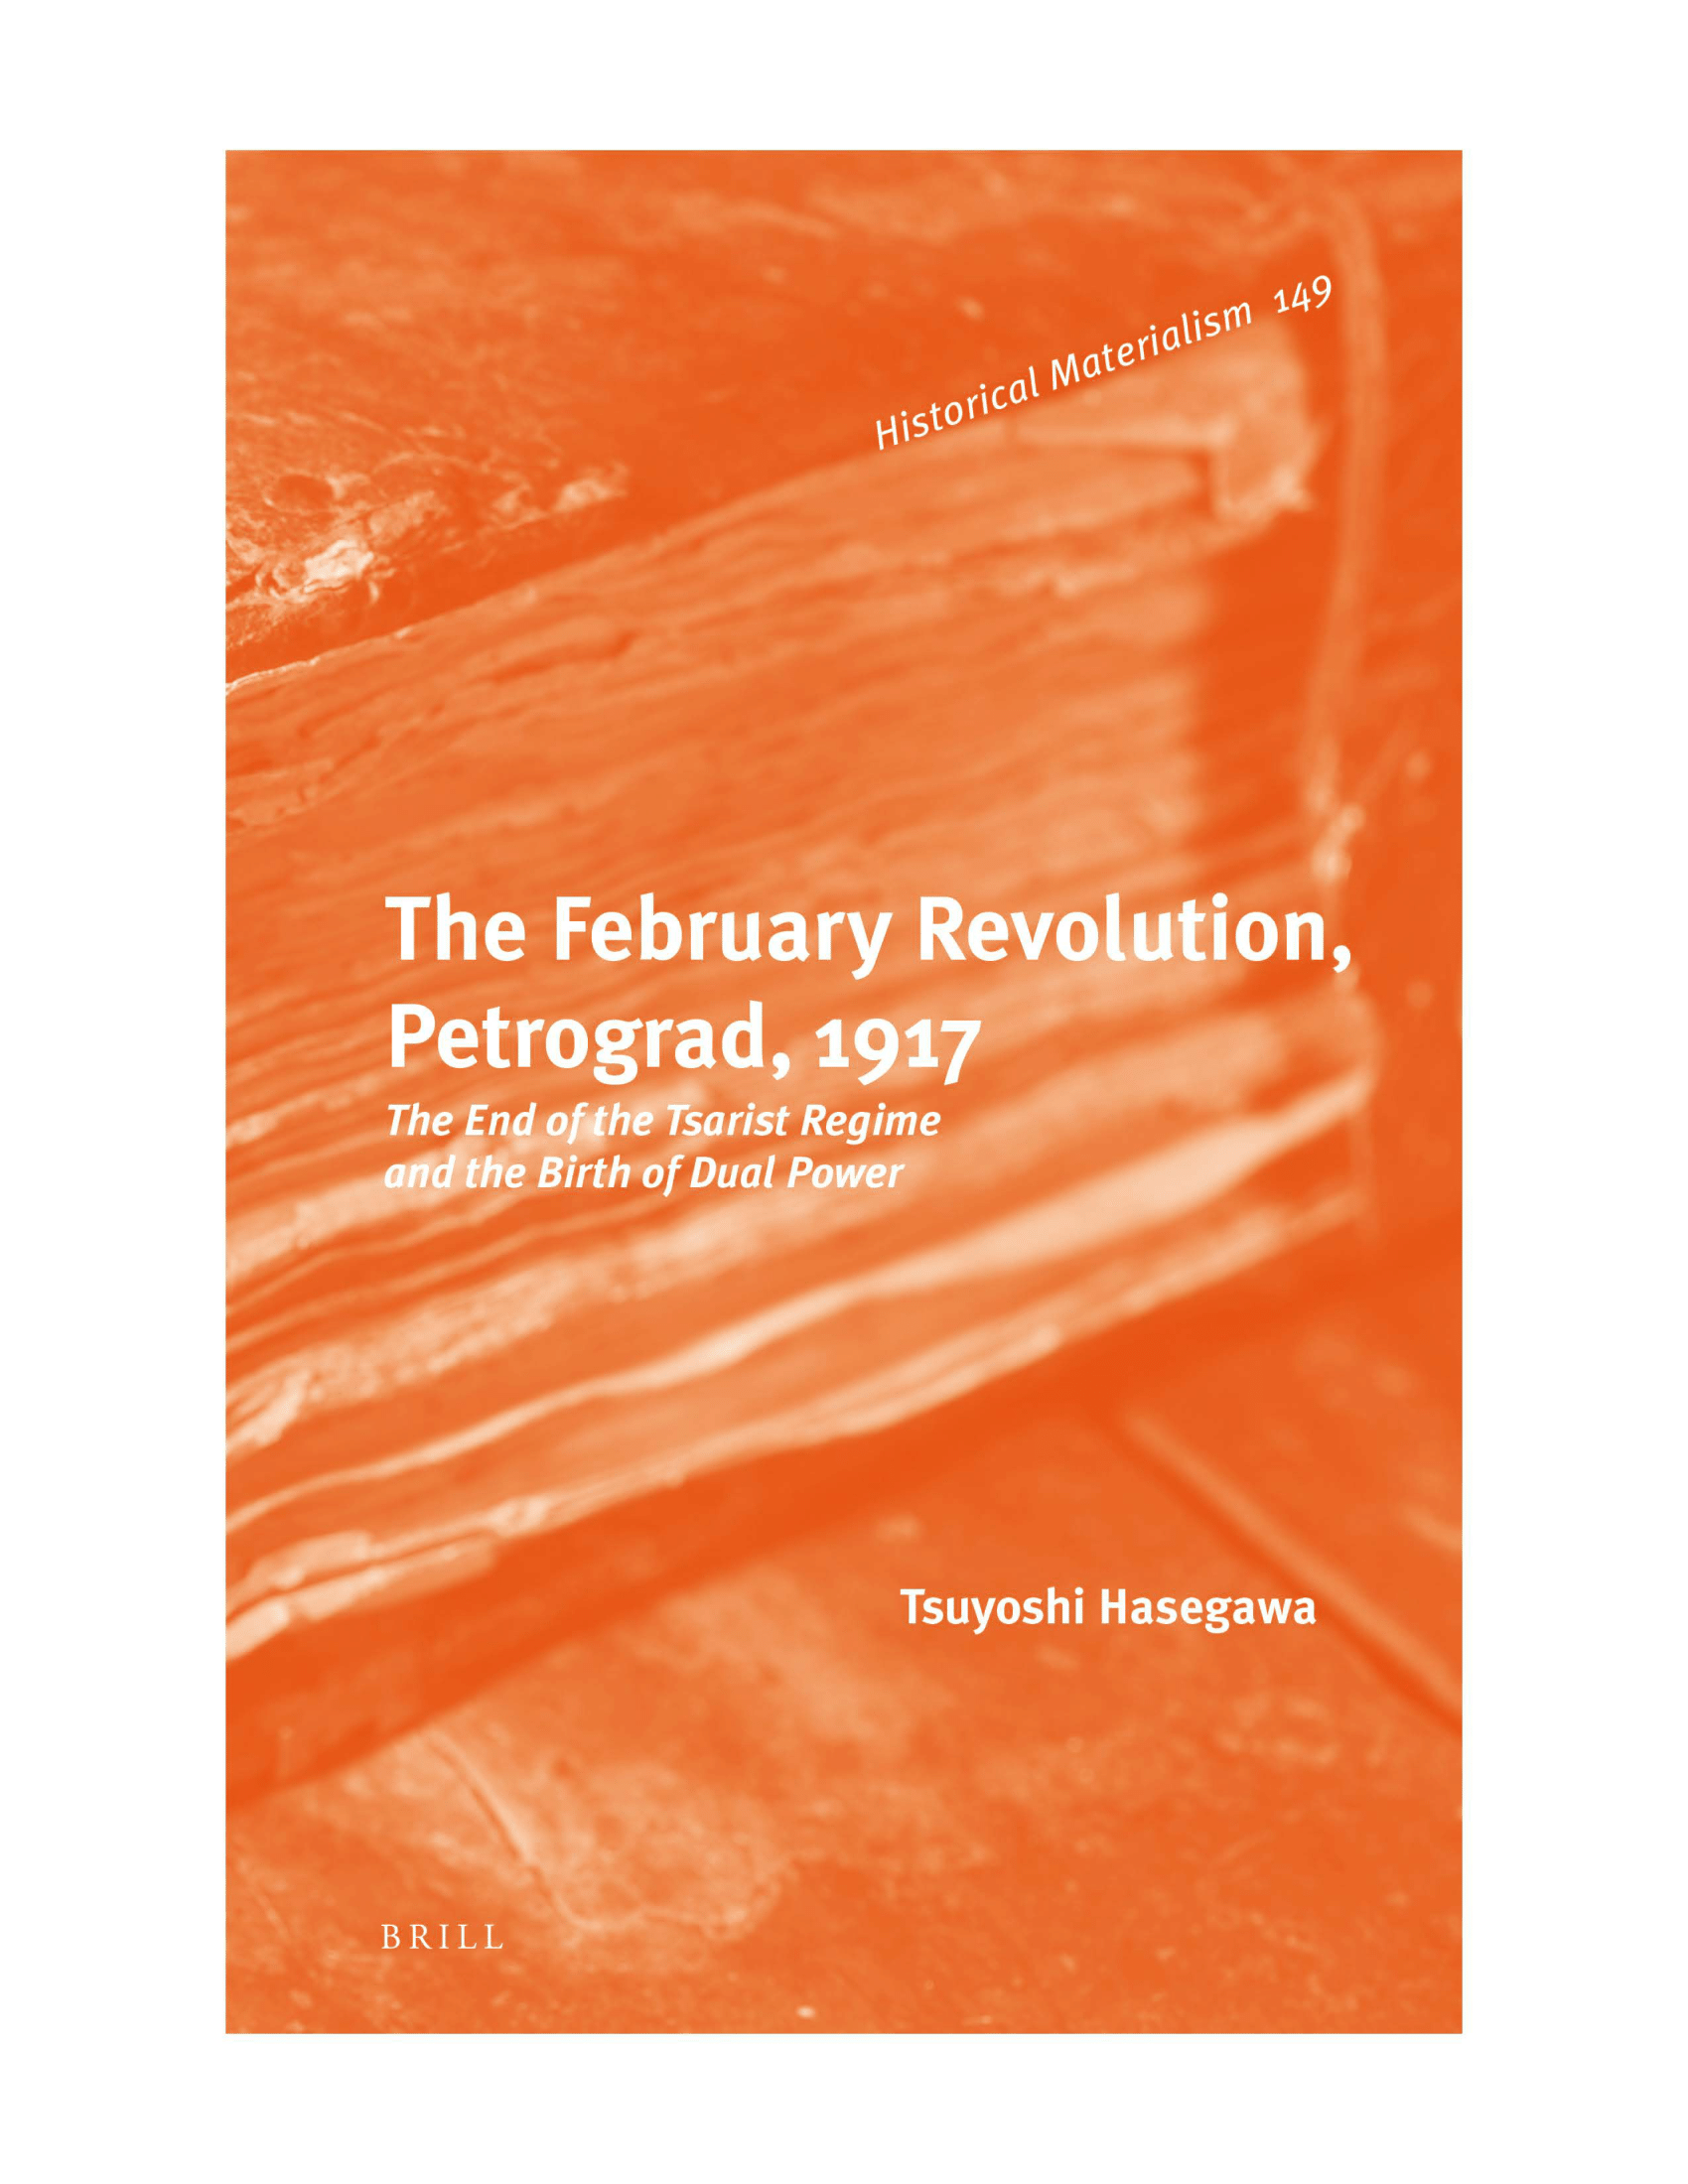 bookcover of Tsuyoshi Hasegawa's The February Revolution, Petrograd, 1917 The End of the Taoist regime and the Birth of Dual Power